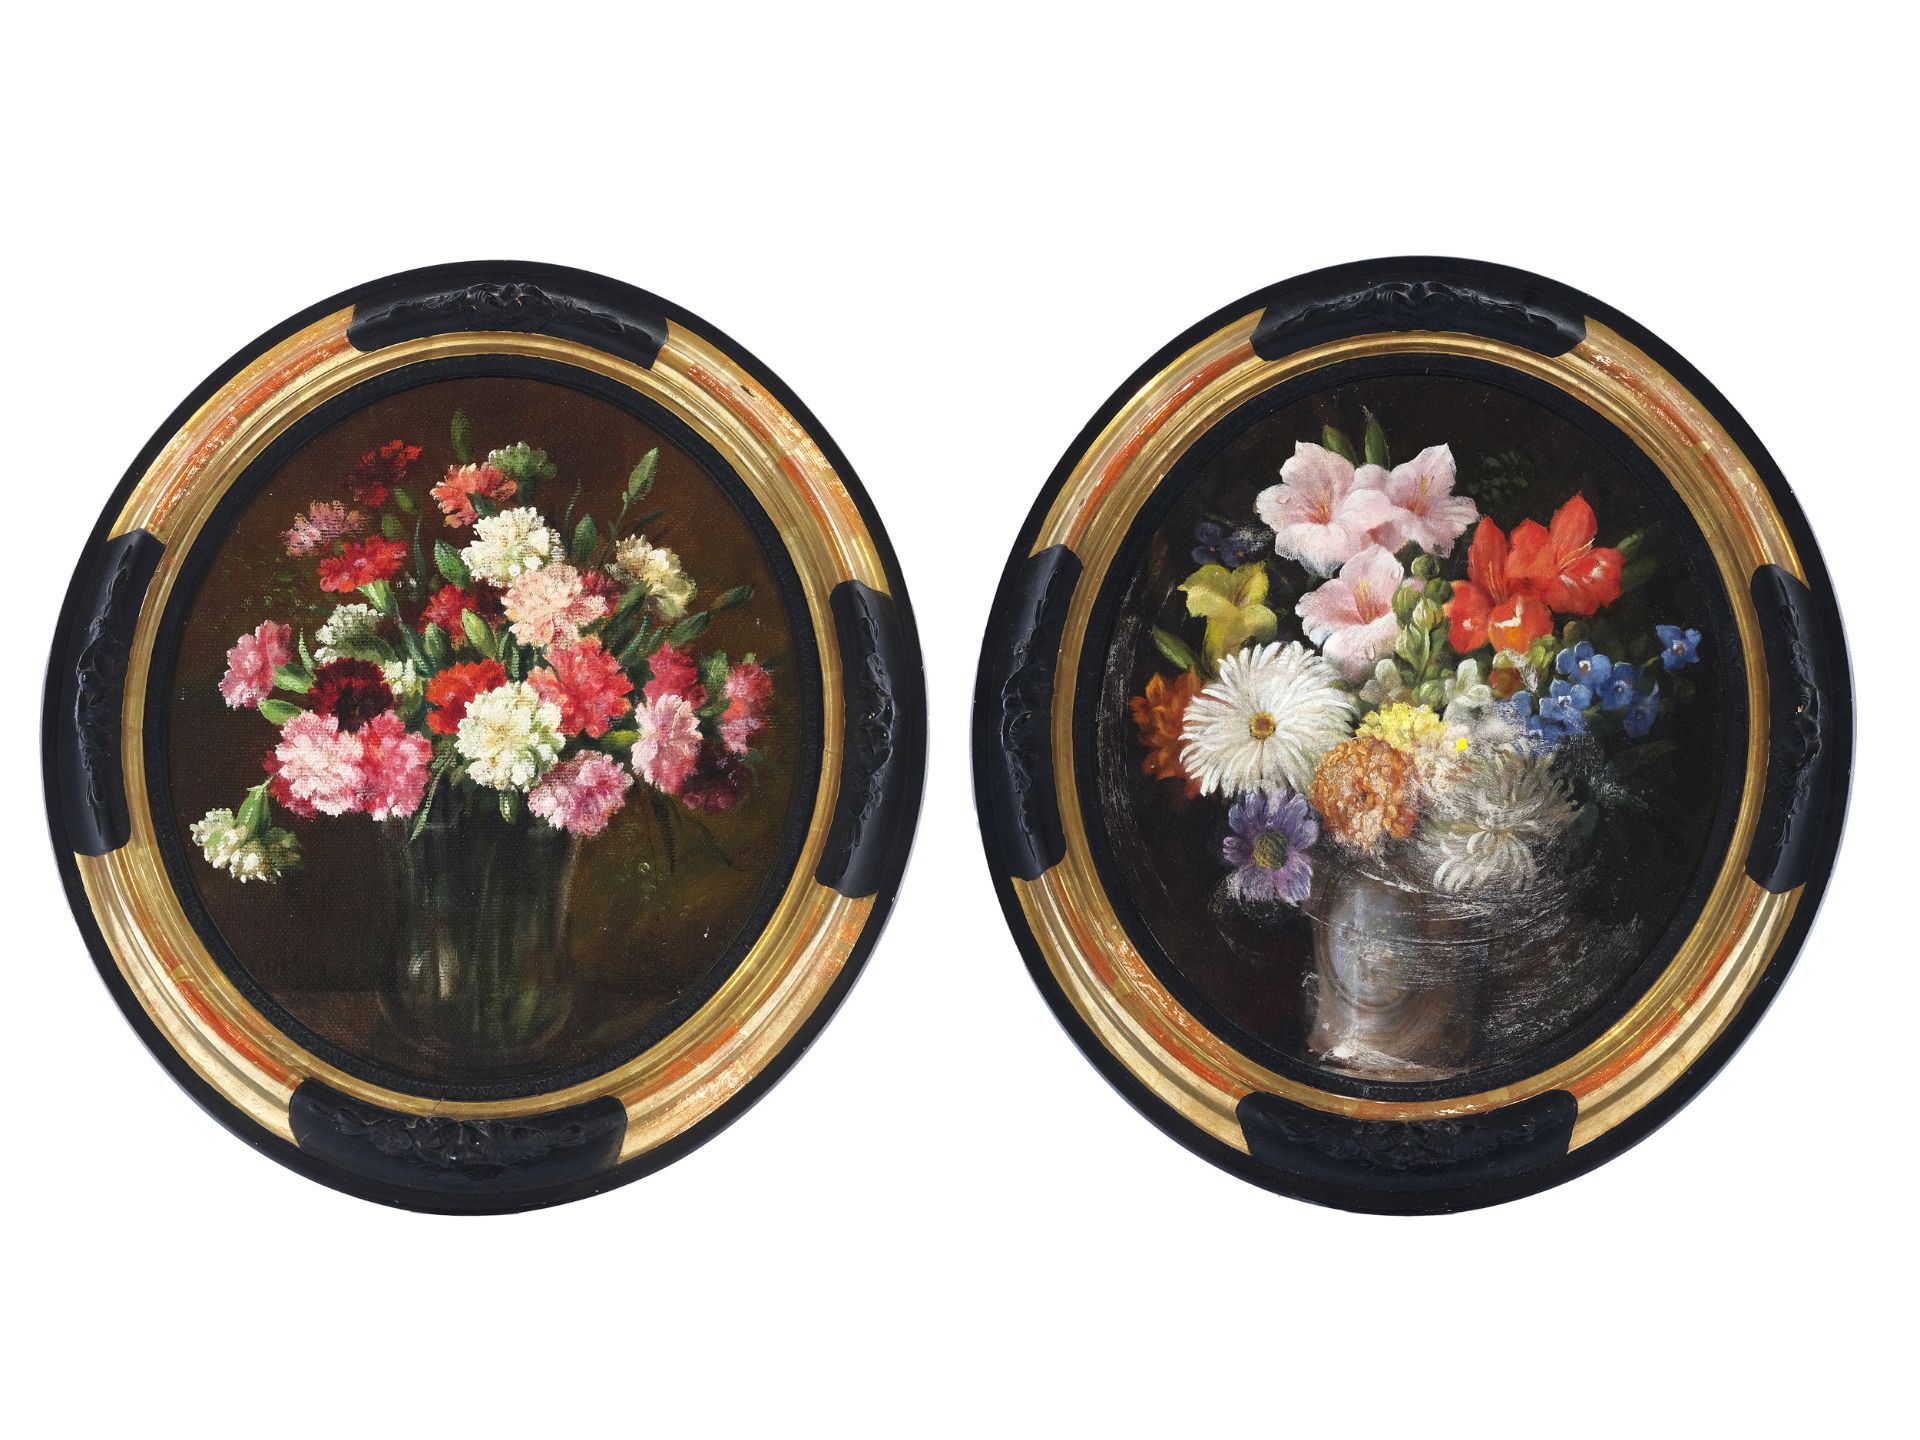 Pair of oval floral still lives, around 1900/20 - Image 2 of 5